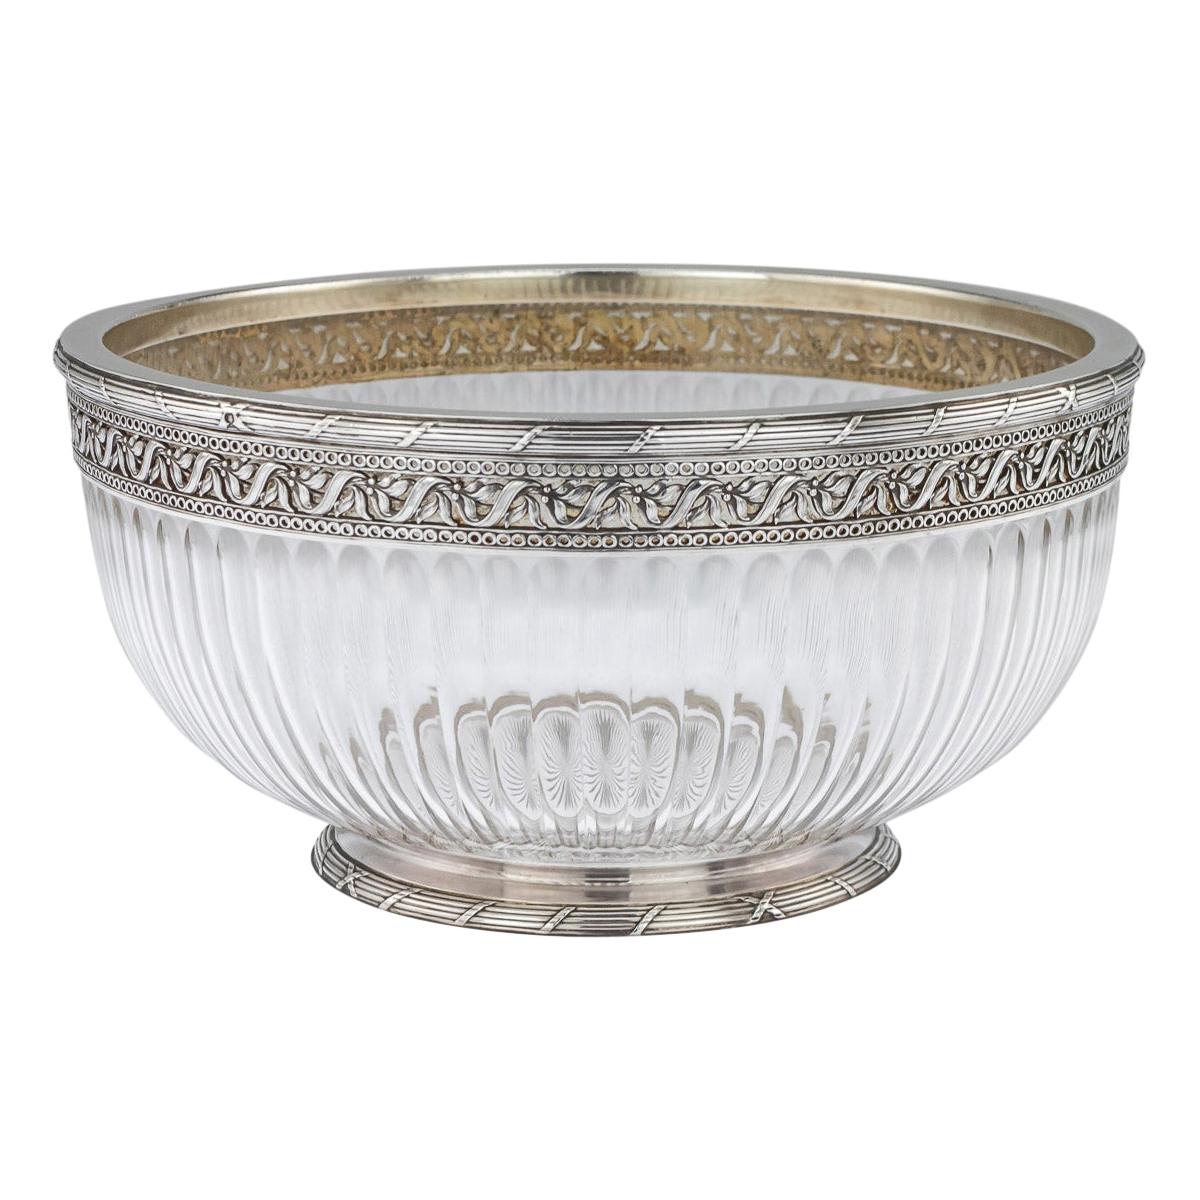 20th Century French Empire Solid Silver & Glass Bowl, Paris, c.1900 For Sale